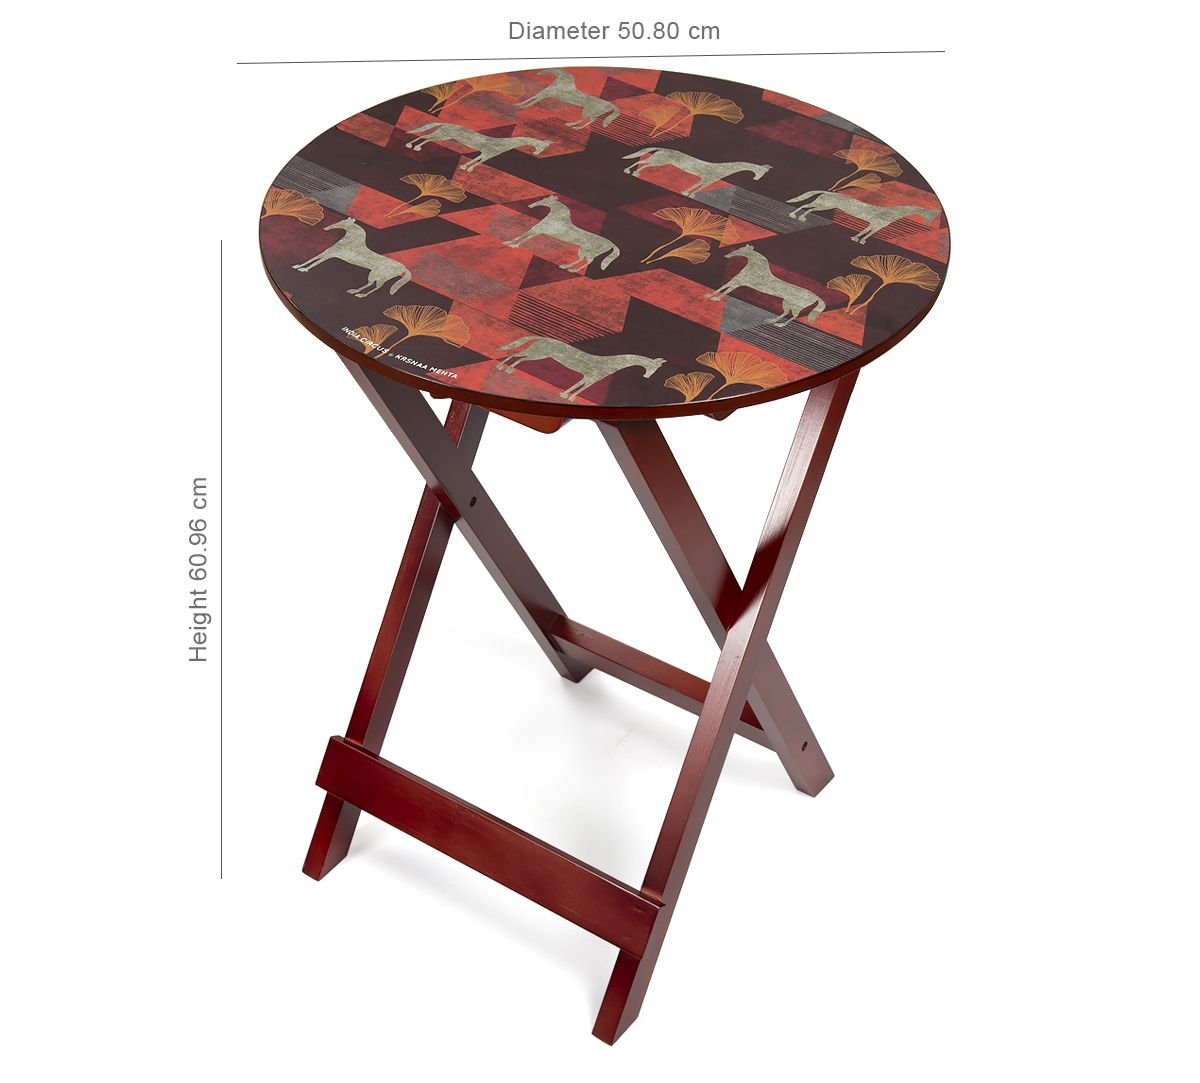 Gallant Gypsy Round Side Table, Round Accent Table Cover